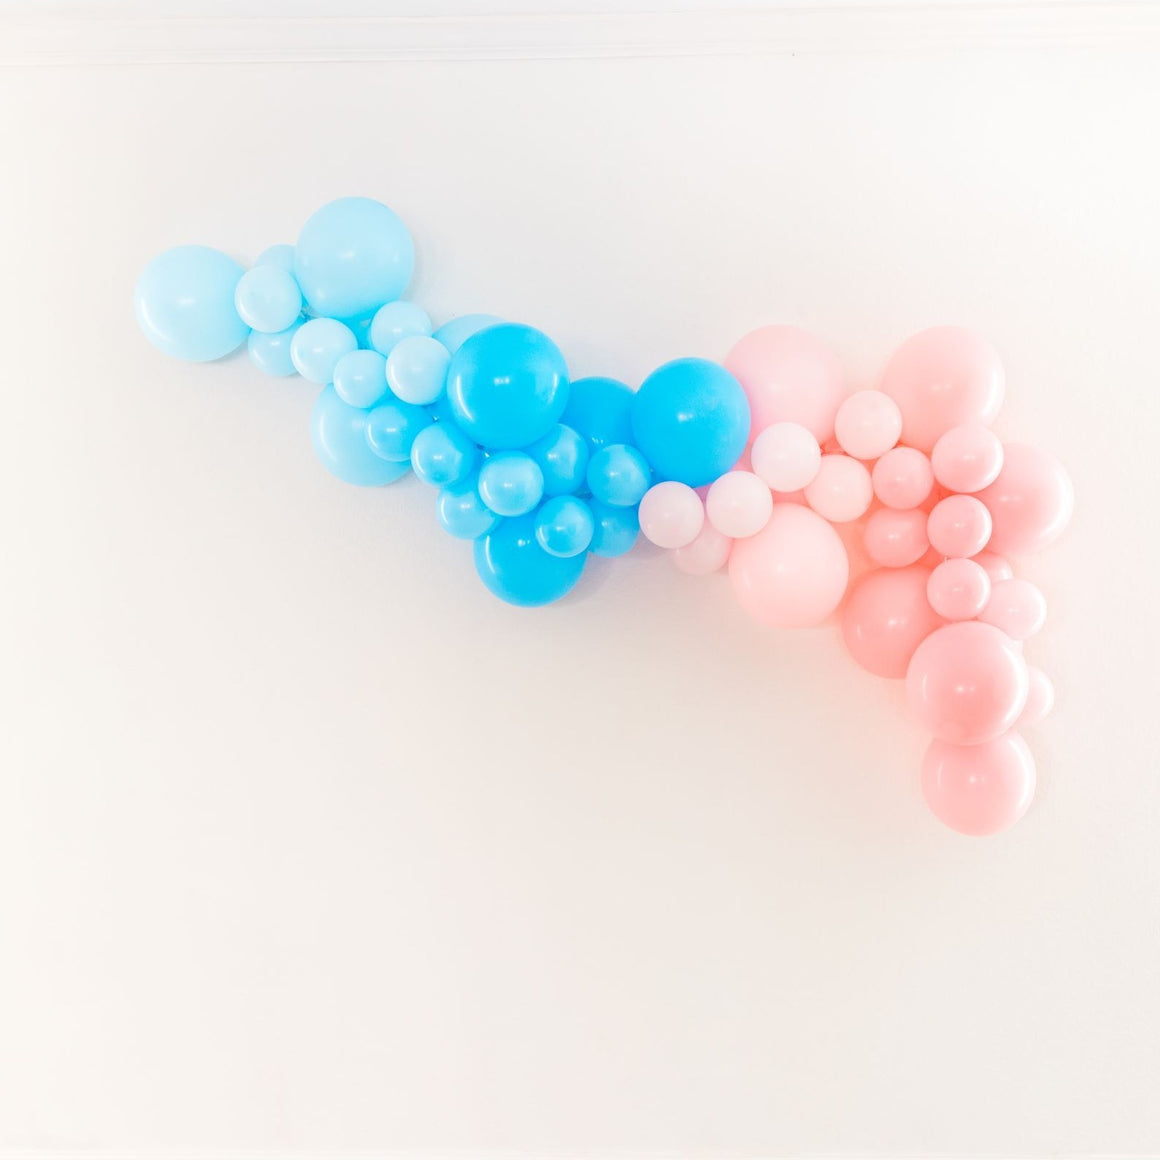 A soft pretty balloon garland is draped on a white wall. With a mix of pastel light blue, light blue, pastel pink, and pink balloons in that order from left to right.